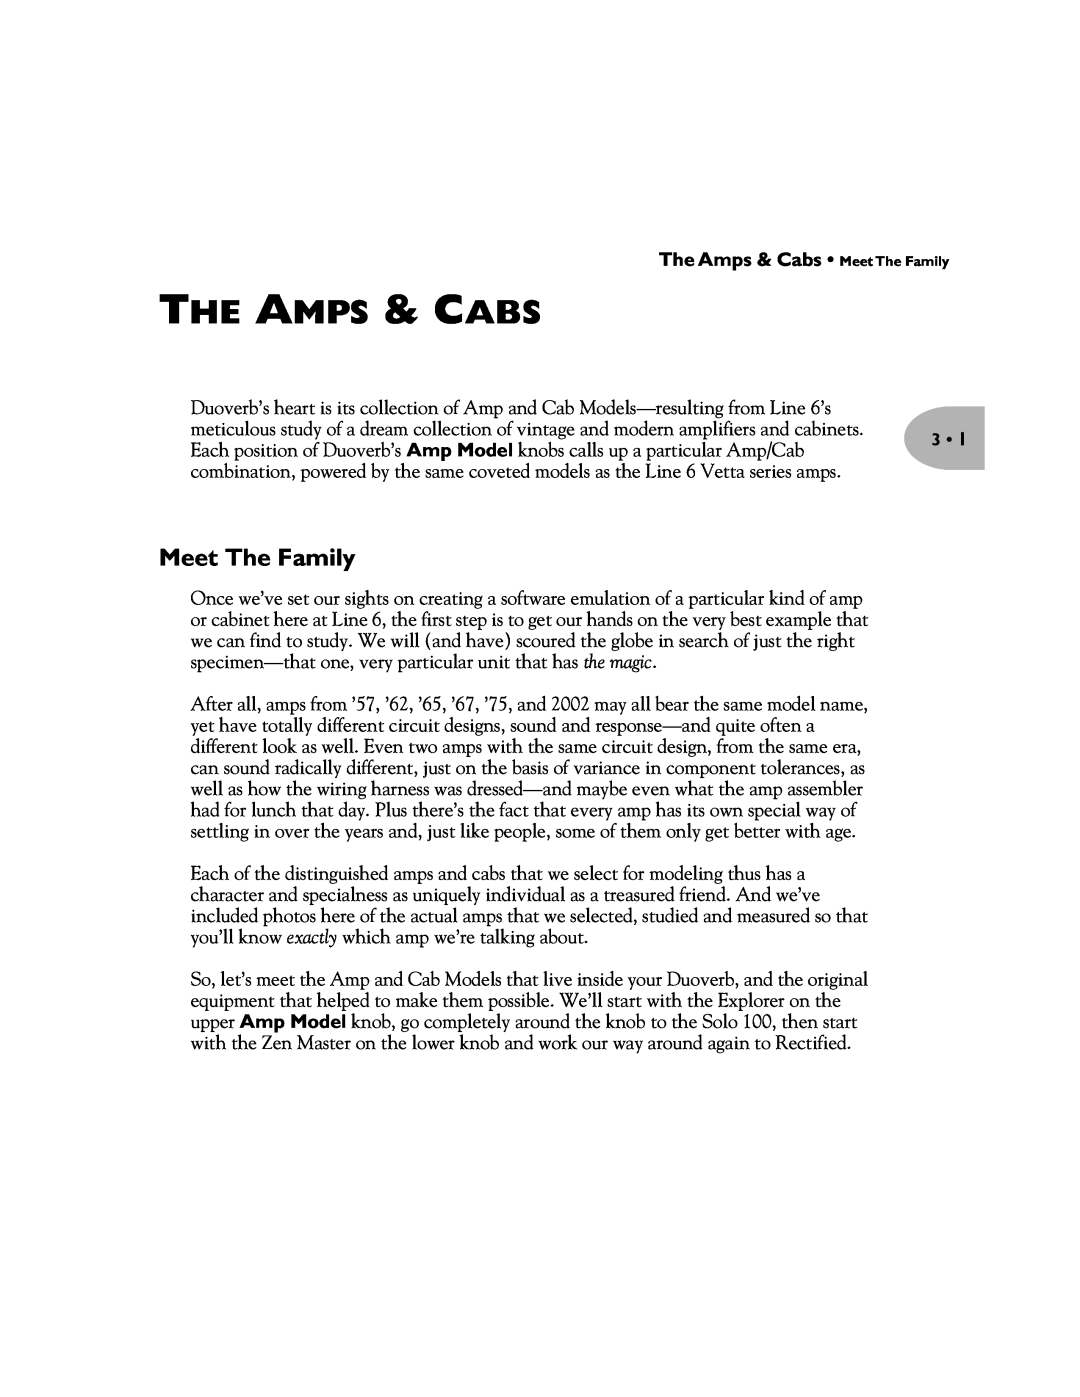 Line 6 Pilot's Handbook manual The Amps & Cabs Meet The Family 